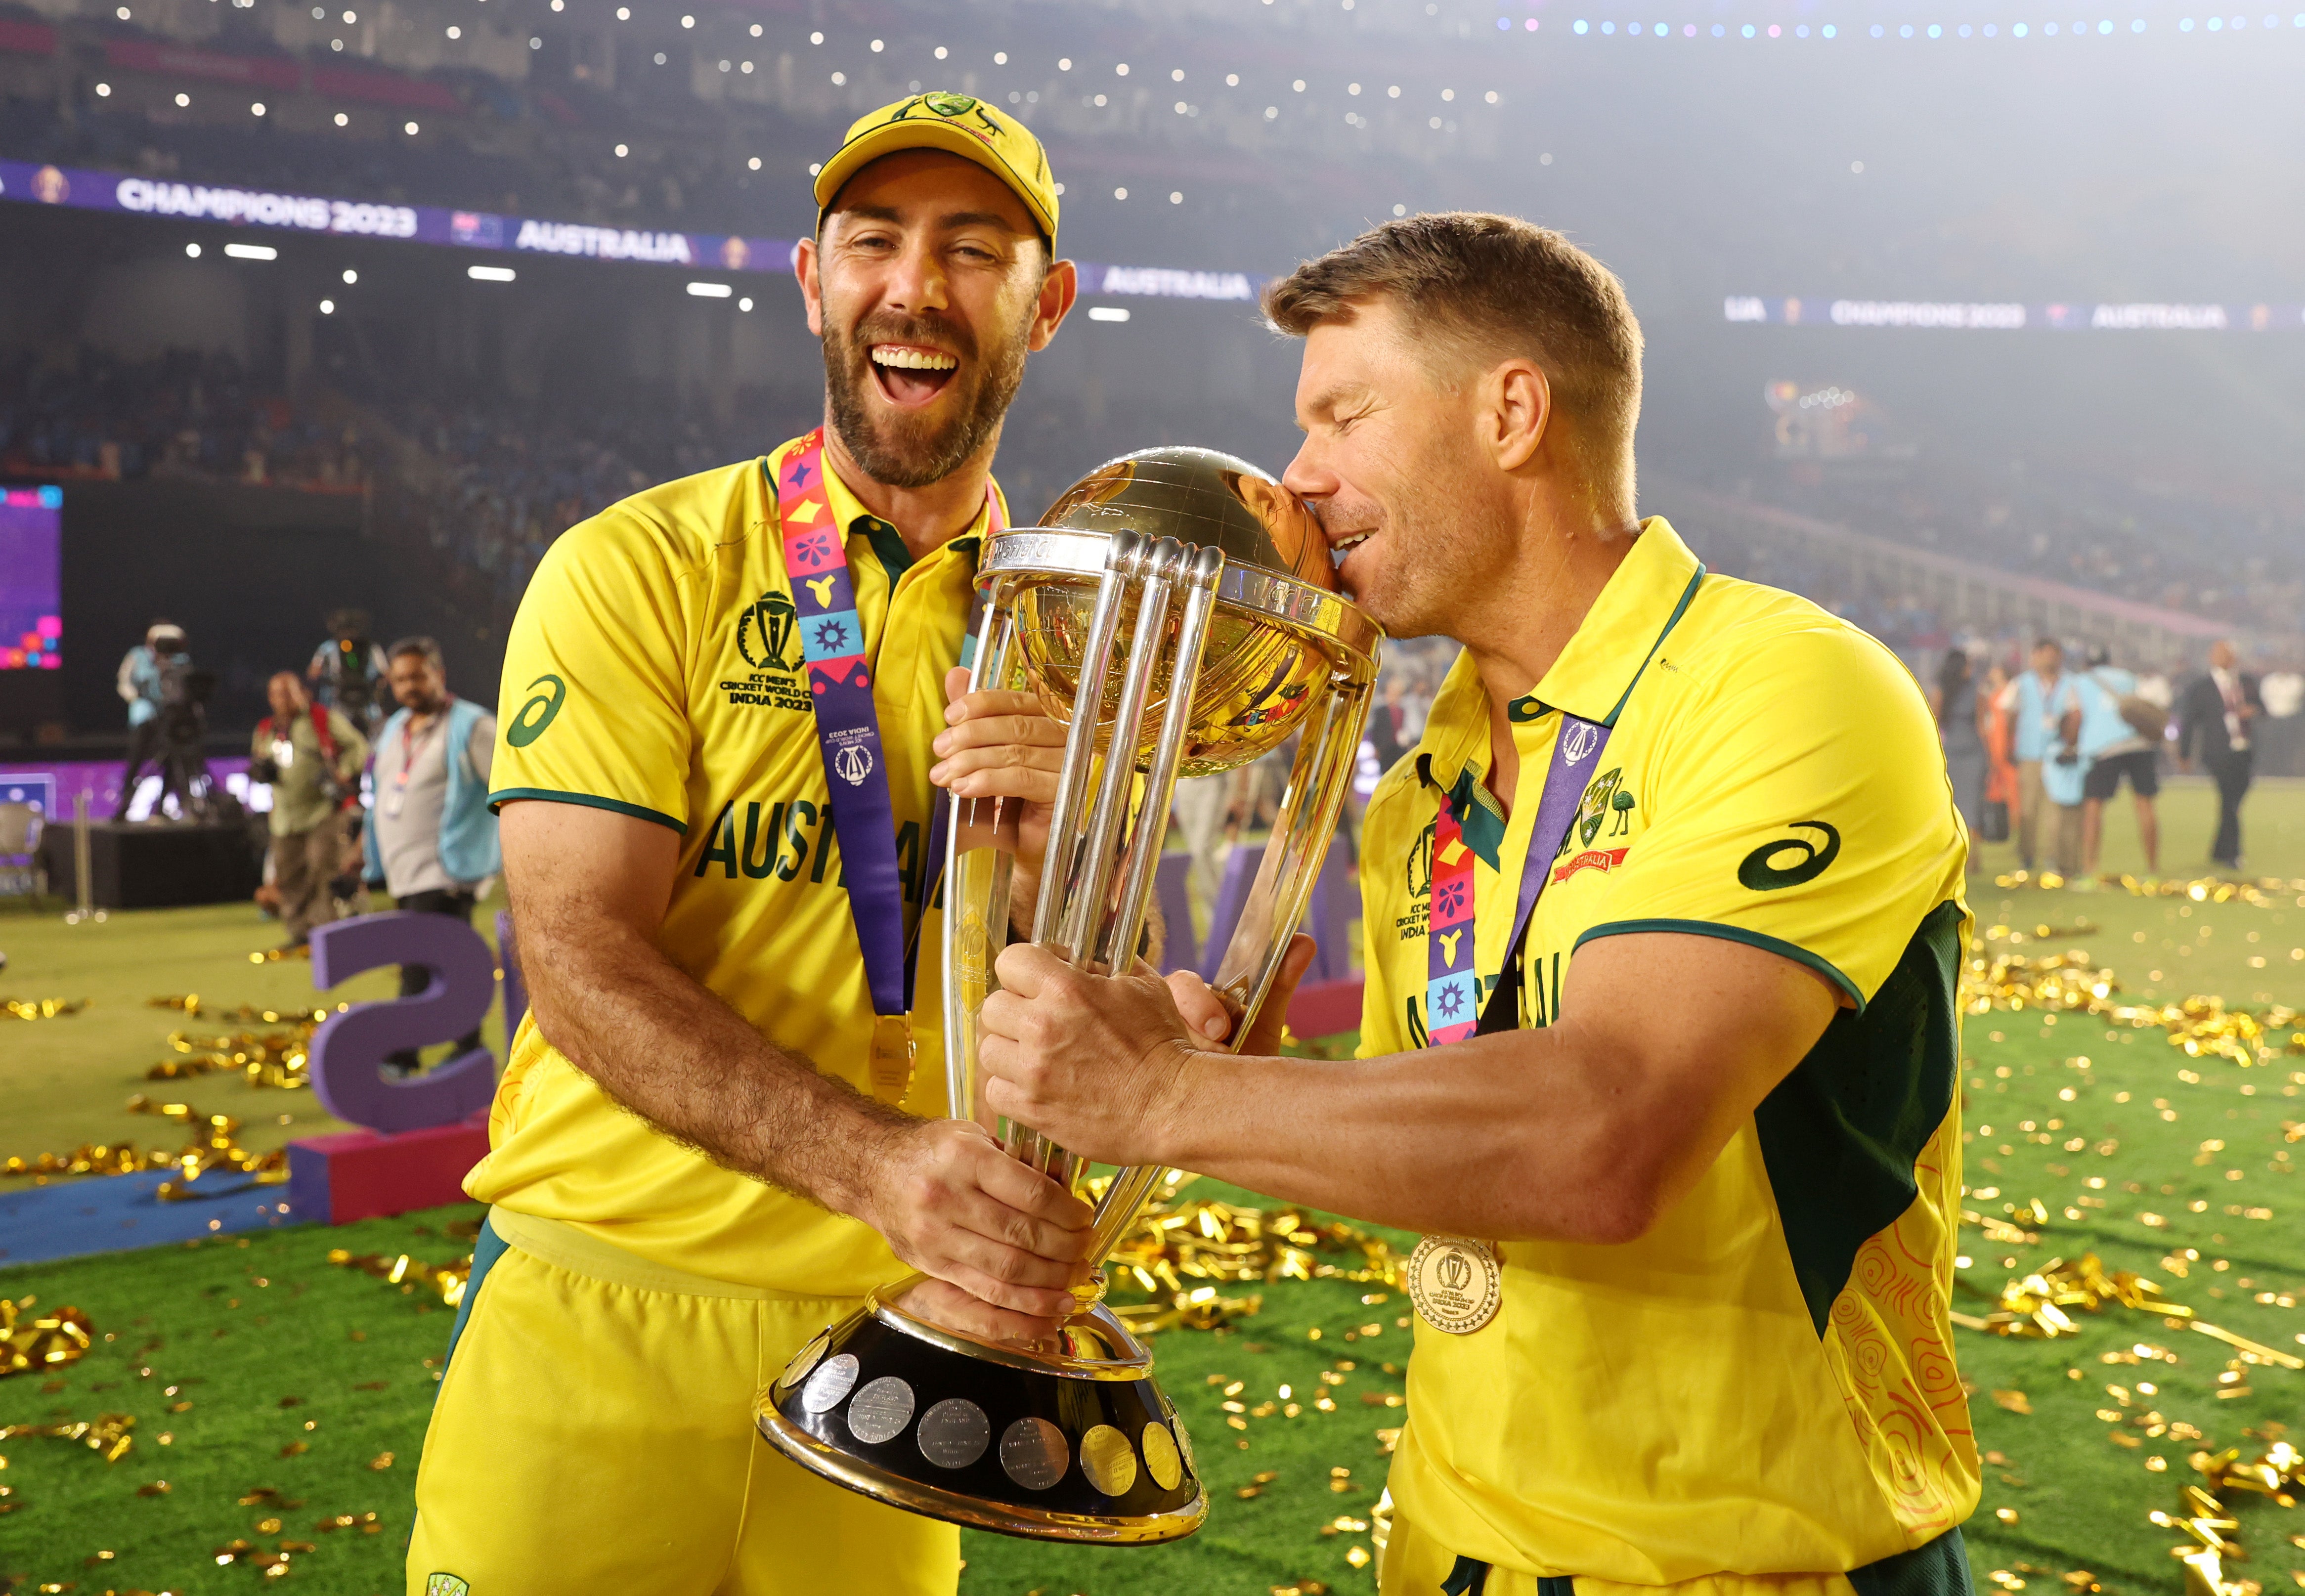 Australia won the 50-over World Cup less than a year ago in India